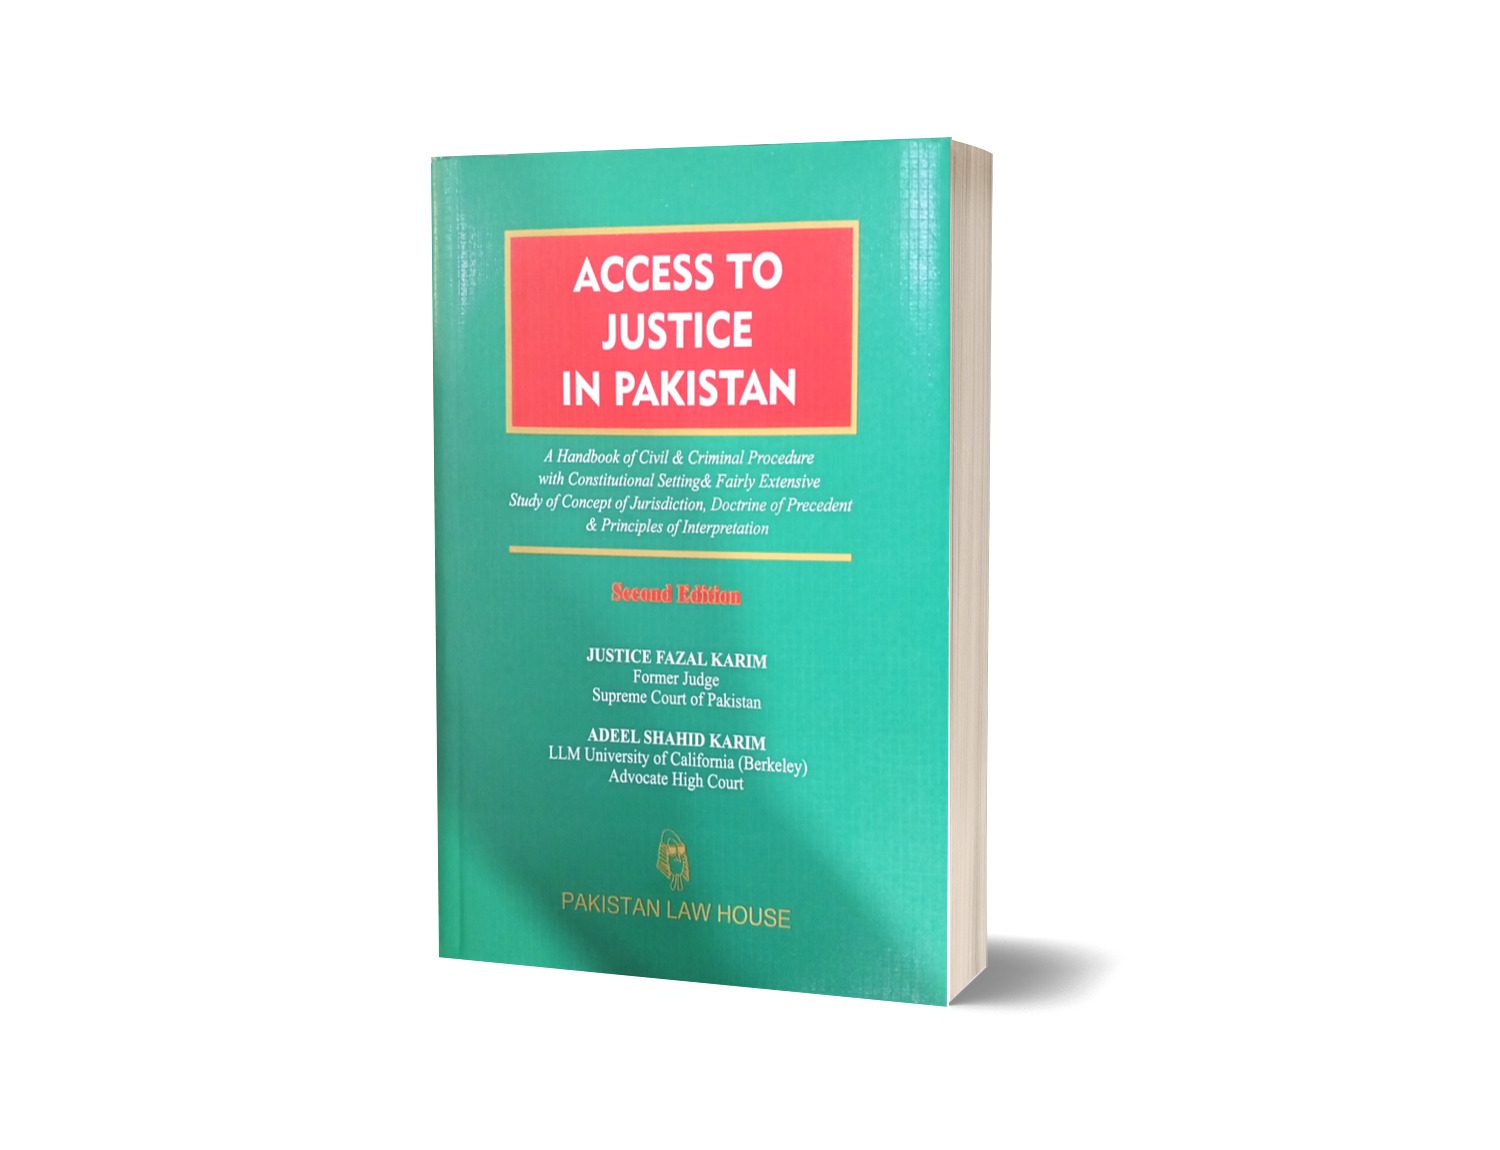 access to justice by fazal karim pdf download